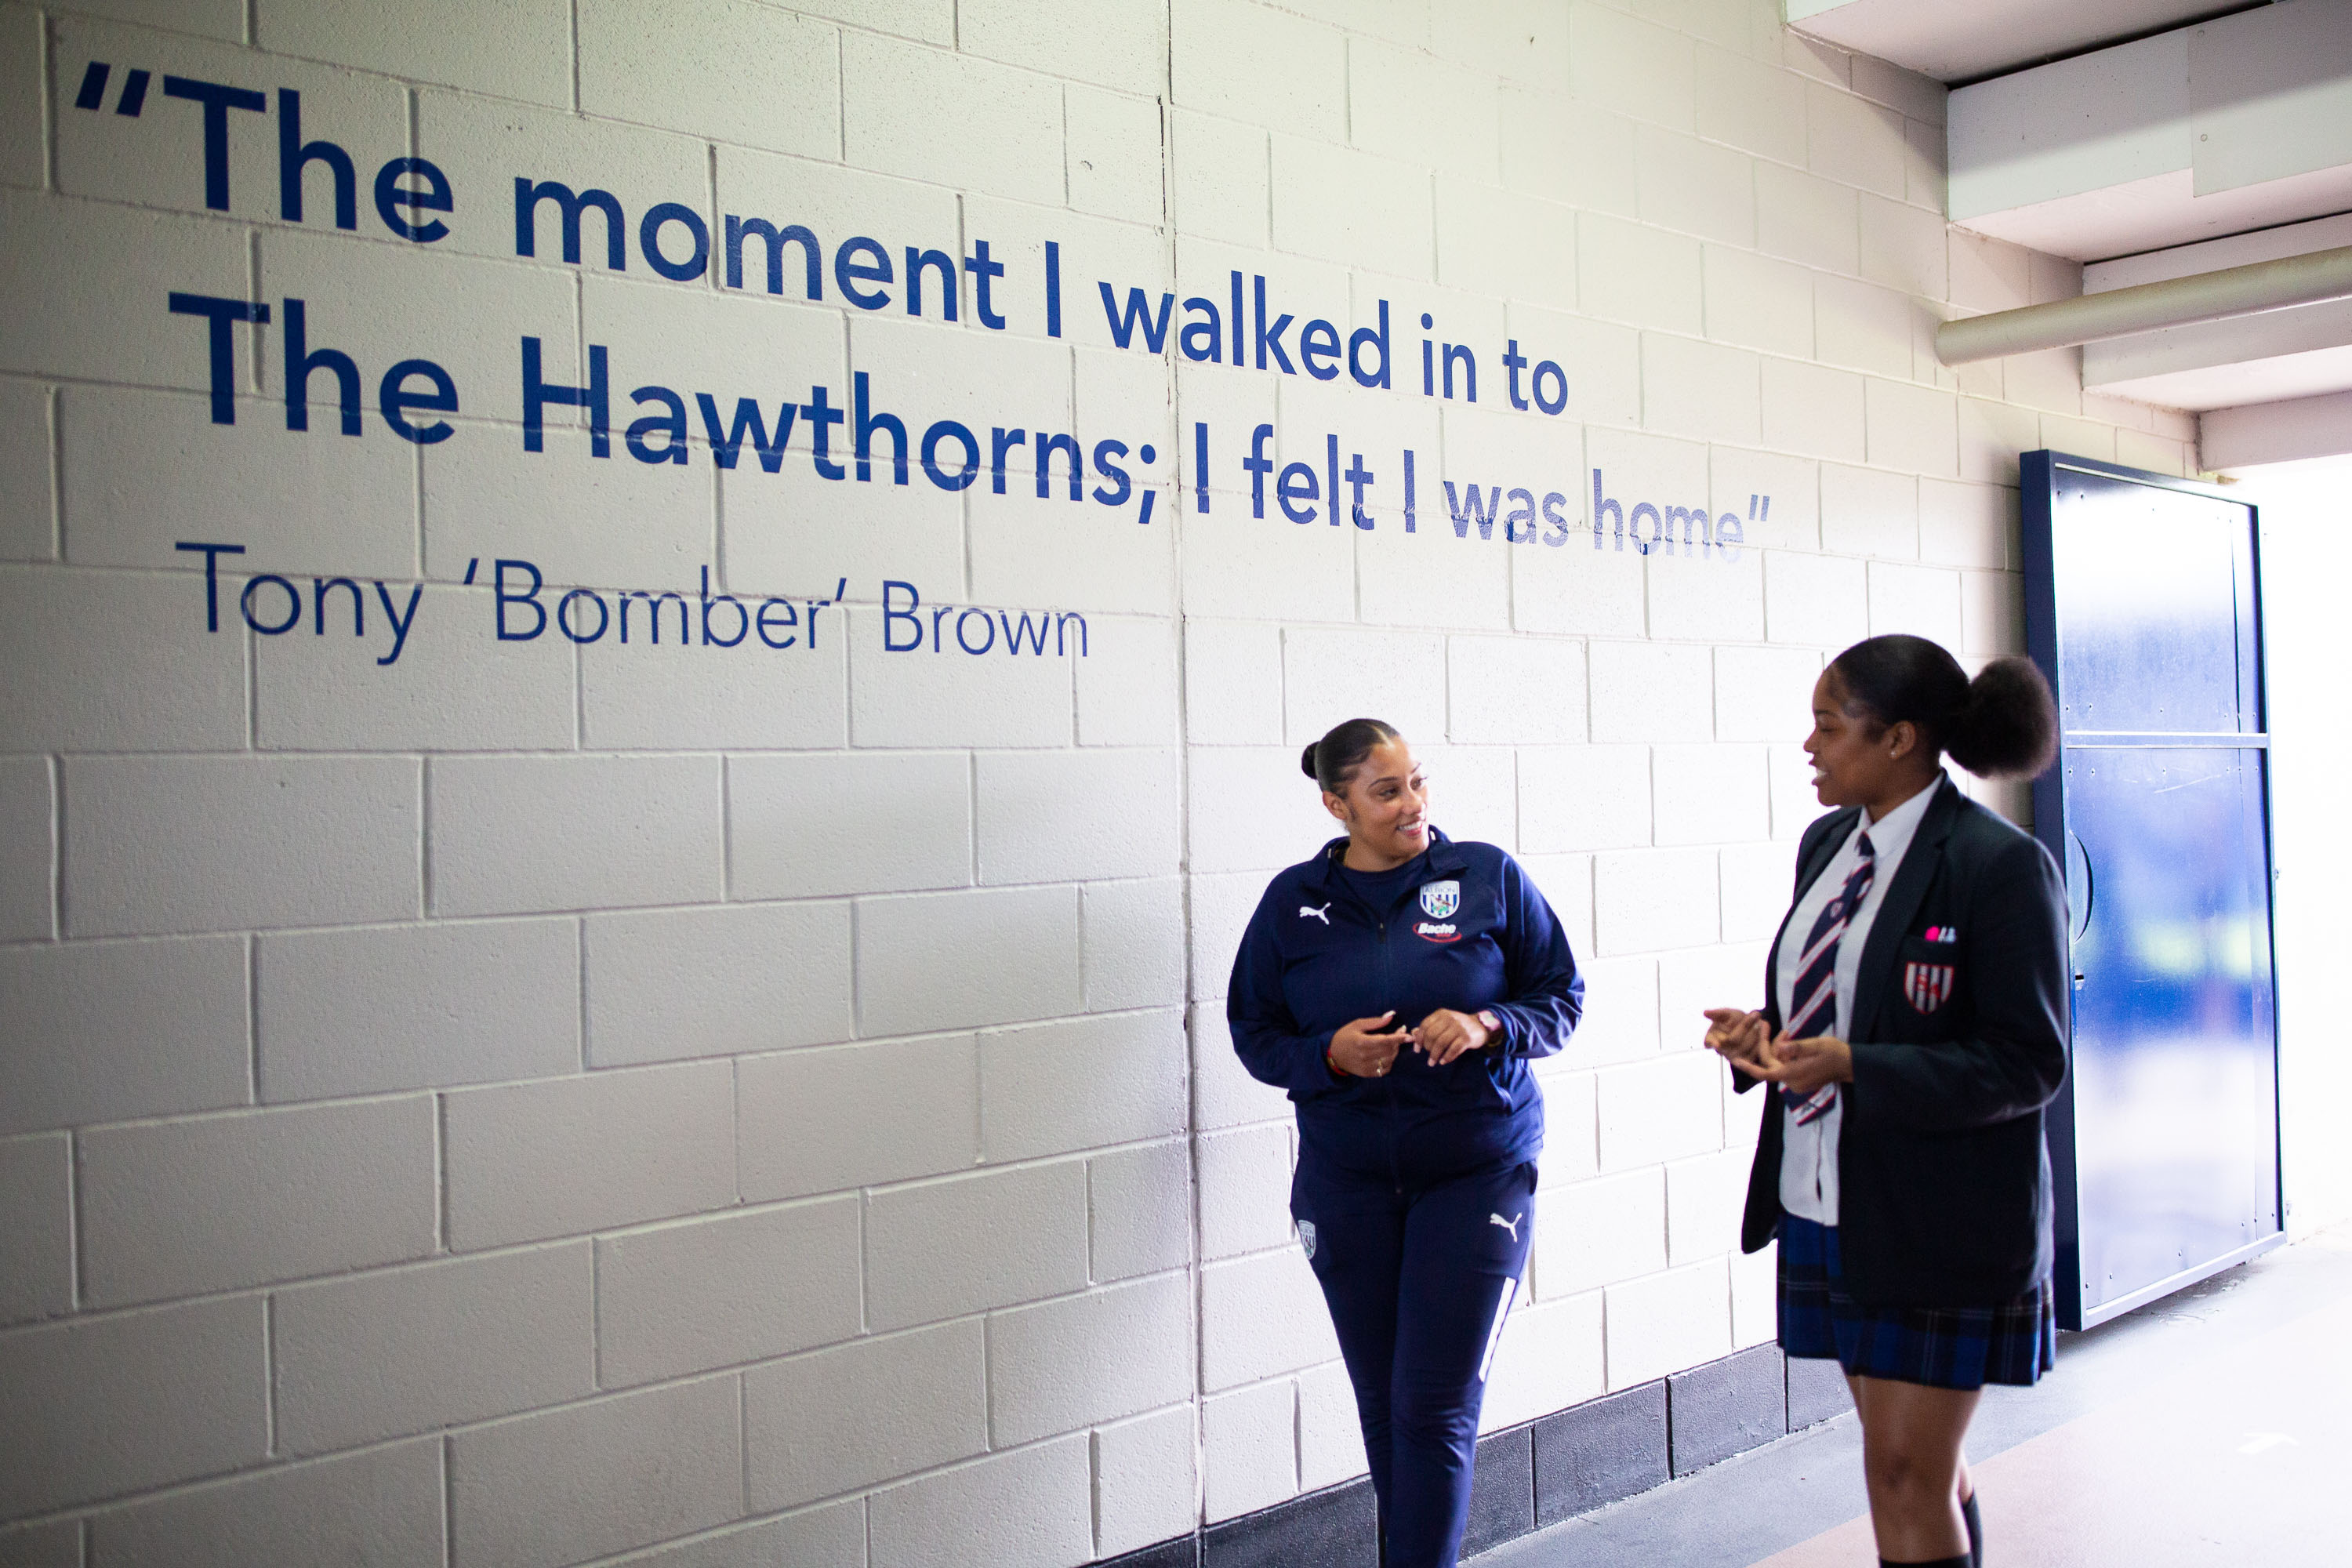 Foundation staff mentoring a student at The Hawthorns